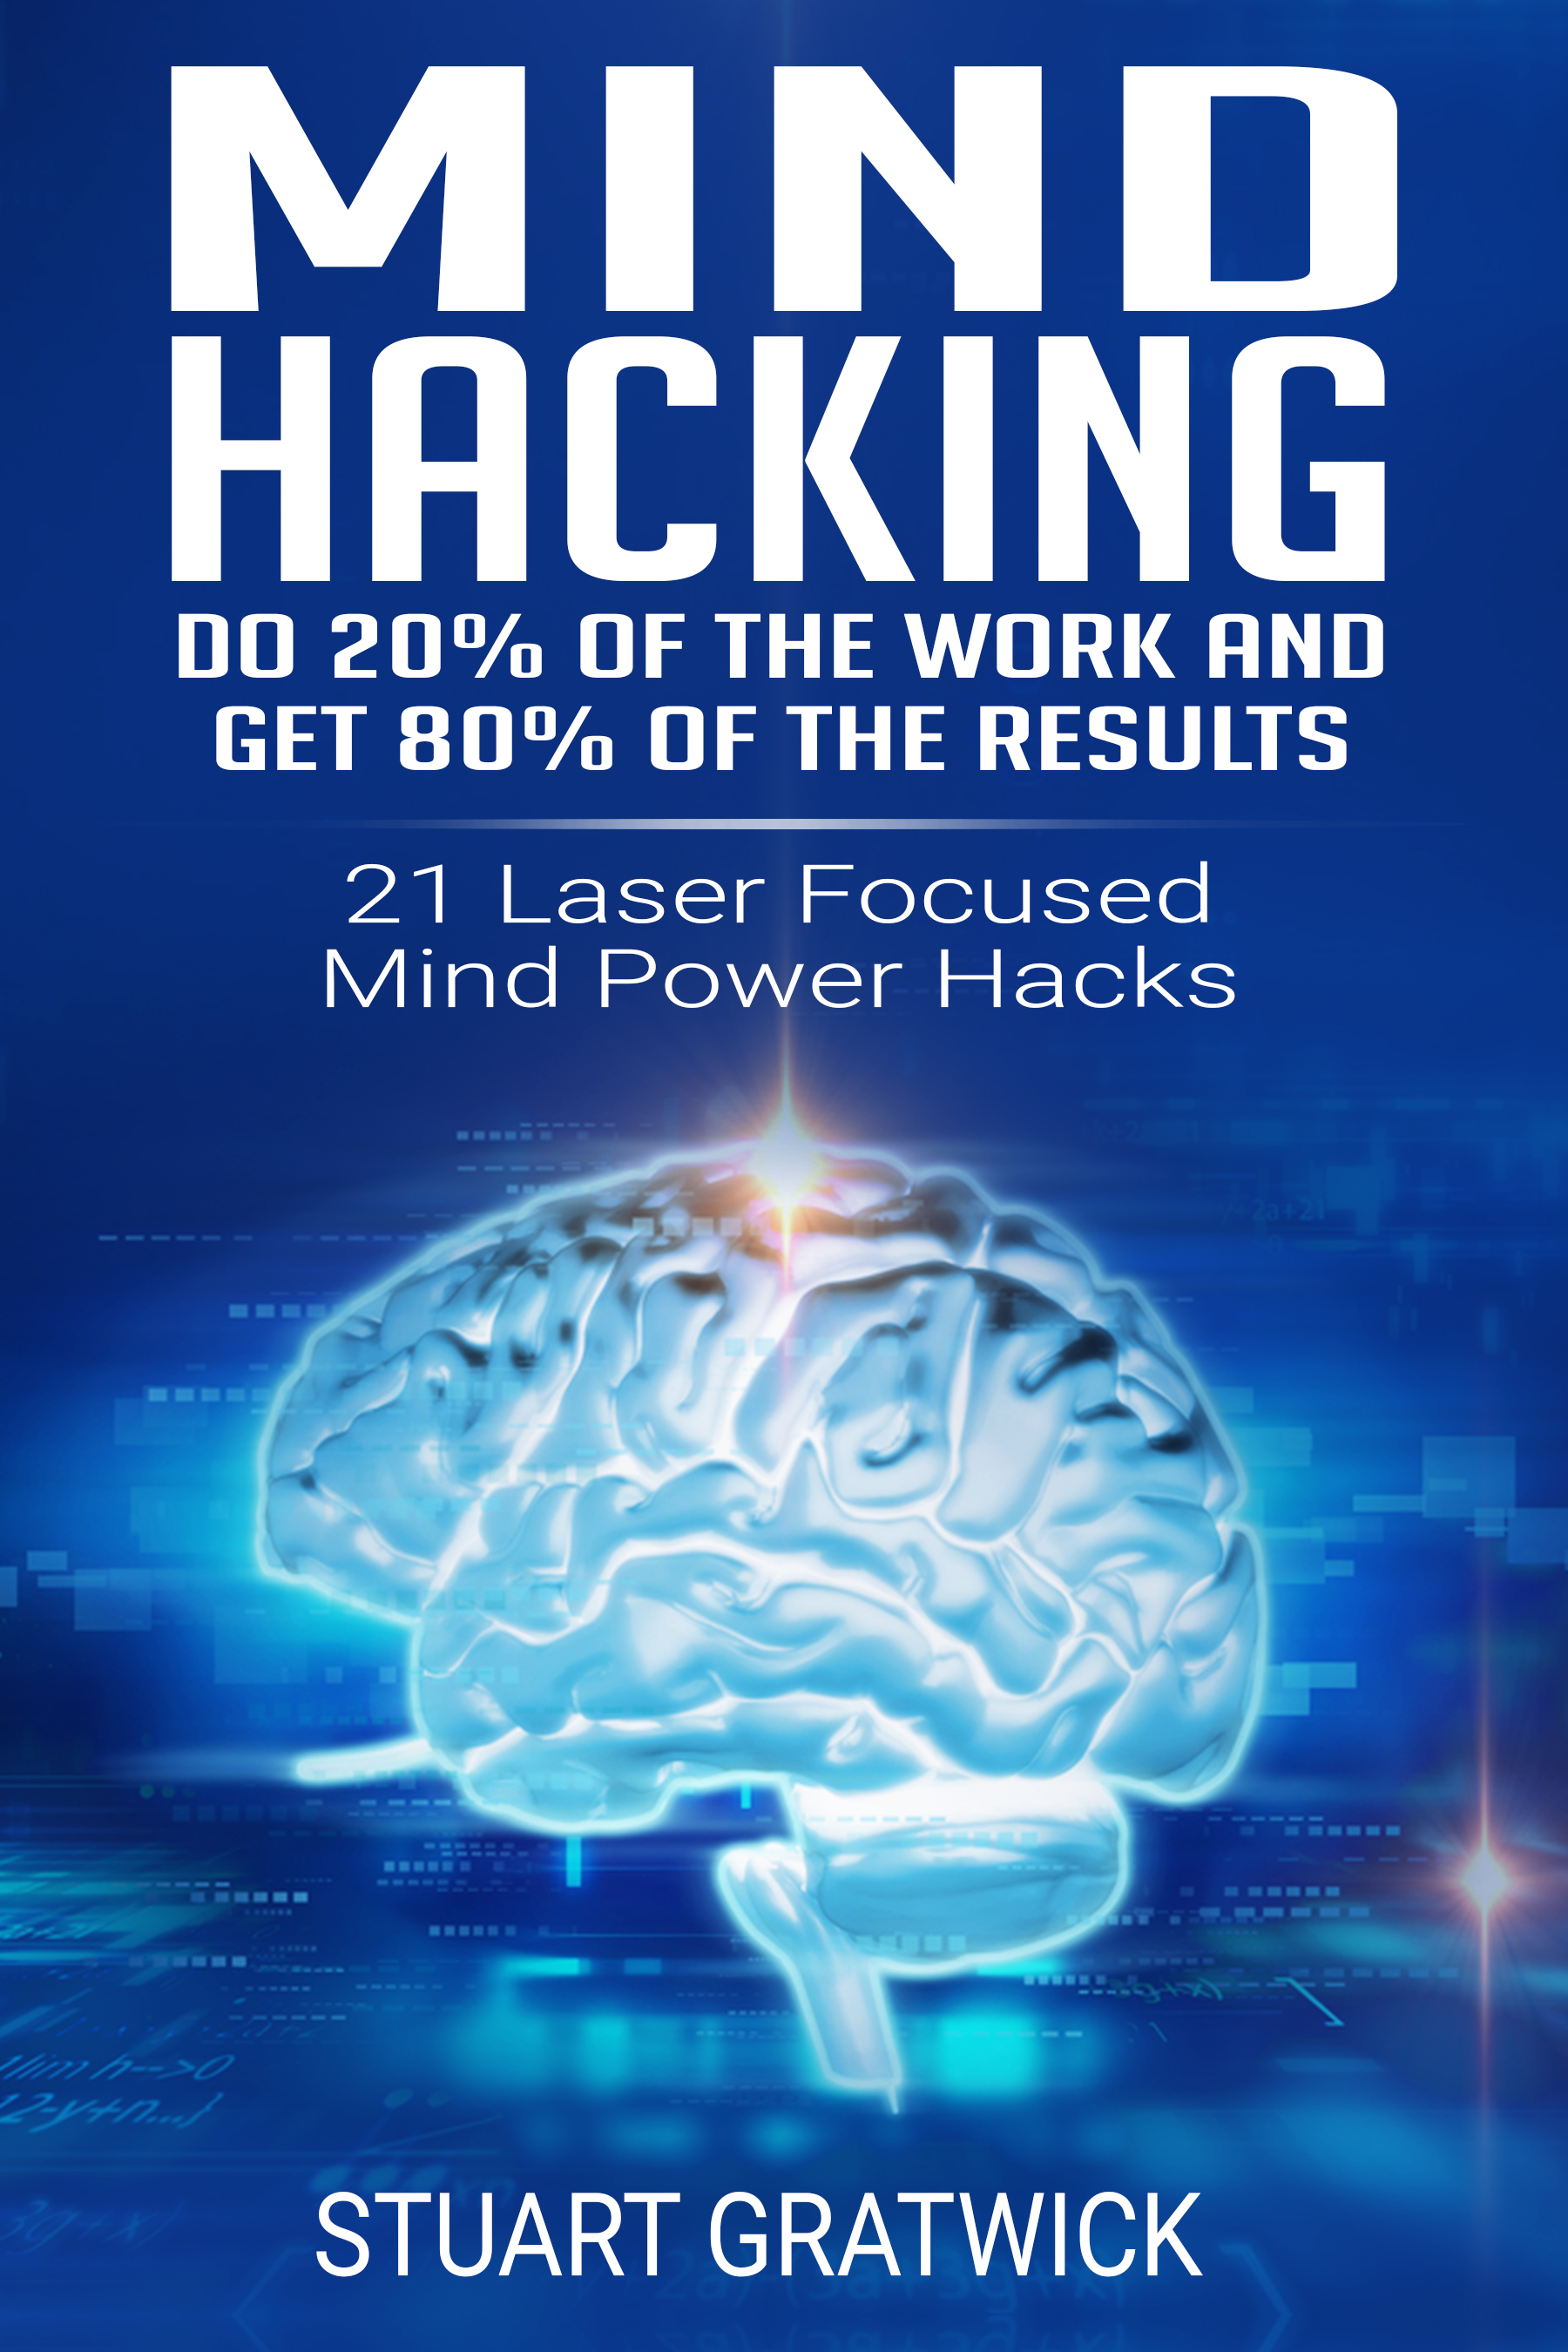 FREE: Mind Hacking: Do 20% of the work and get 80% of the results by Stuart Gratwick